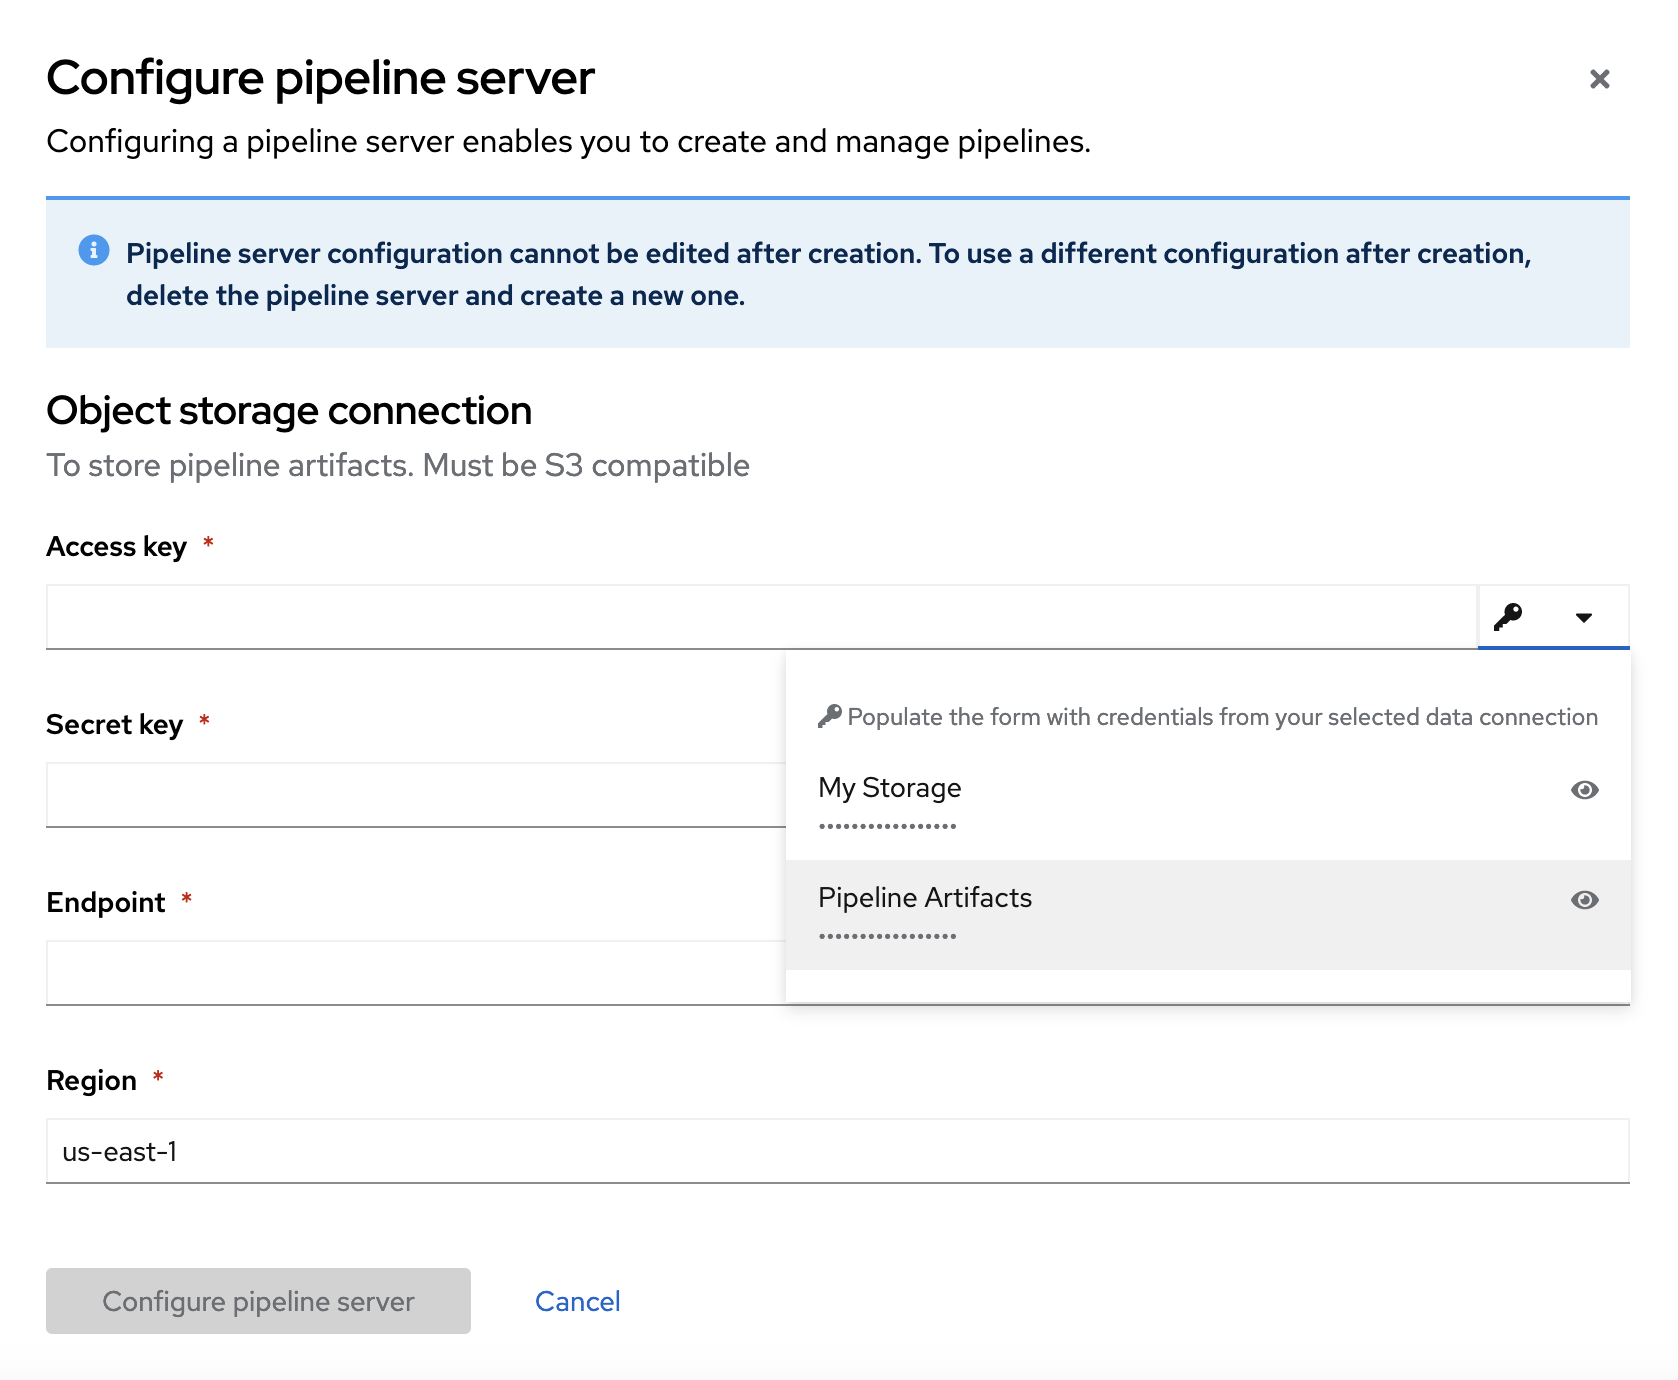 Selecting the Pipeline Artifacts data connection